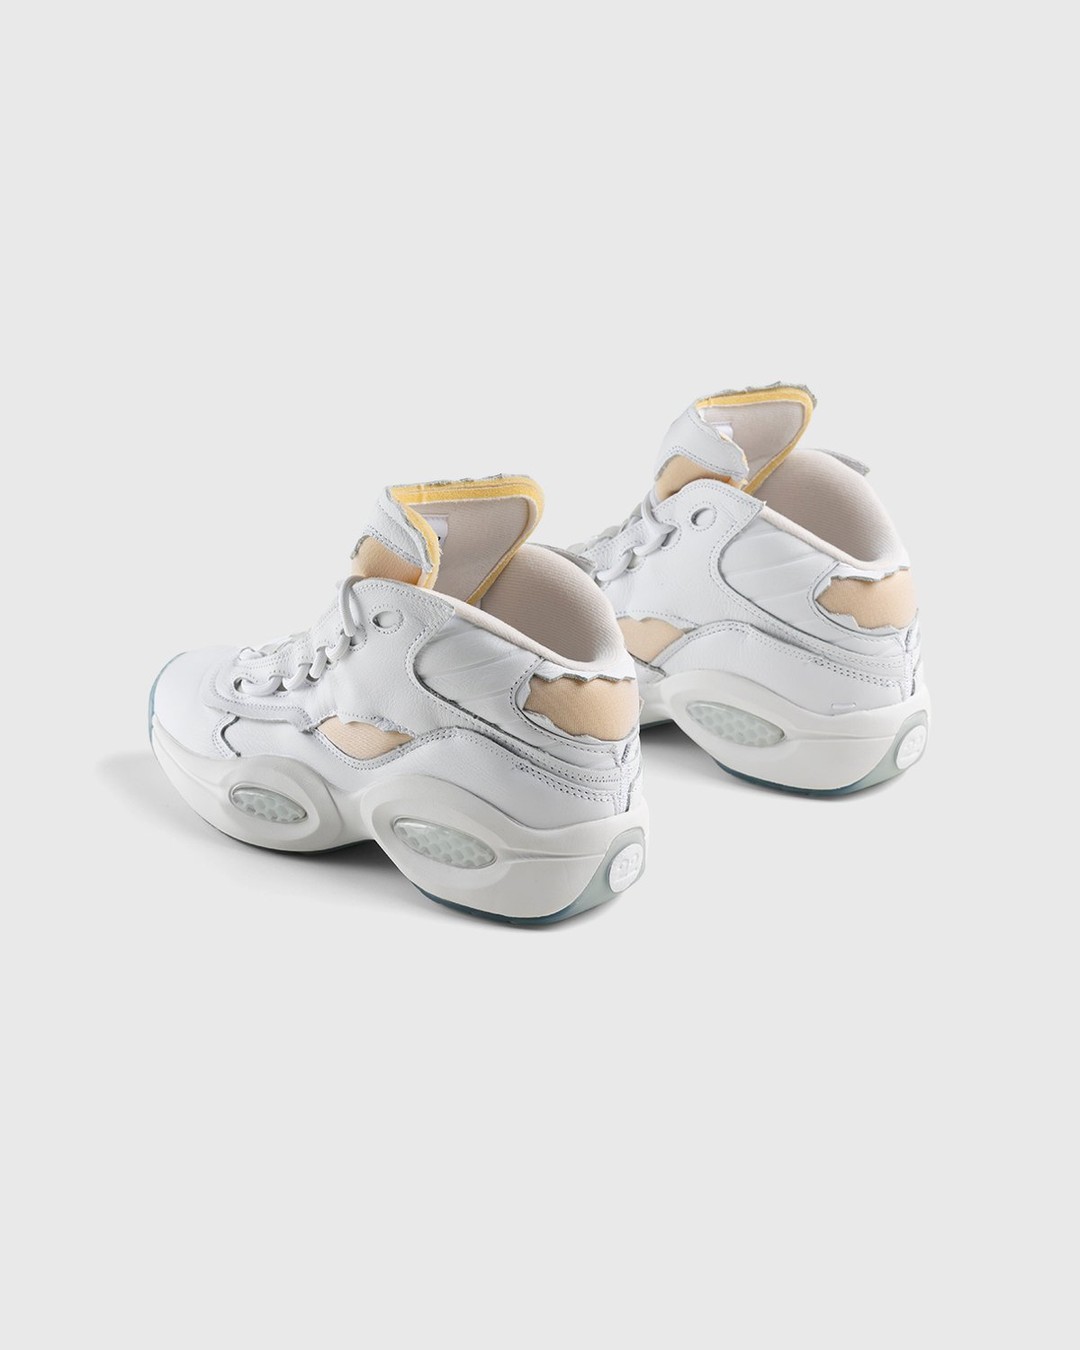 Reebok x Maison Margiela – Question Mid Memory Of White - High Top Sneakers - White - Image 3